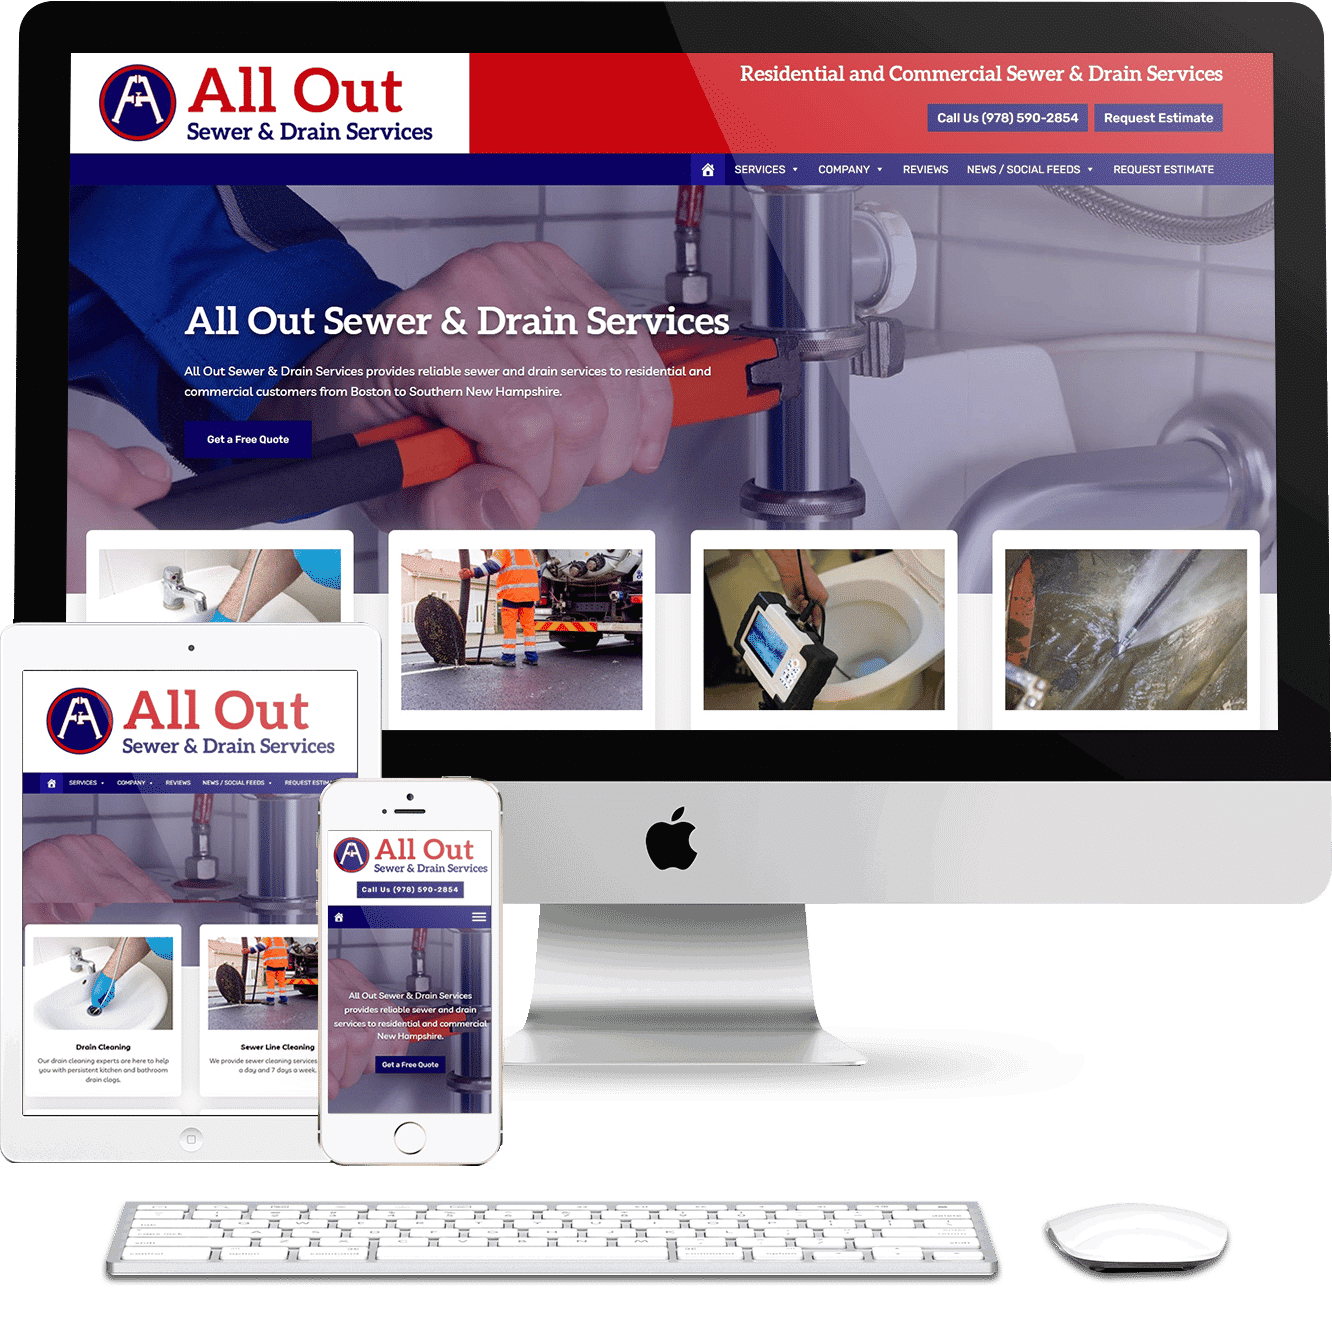 All Out Sewer & Drain Services